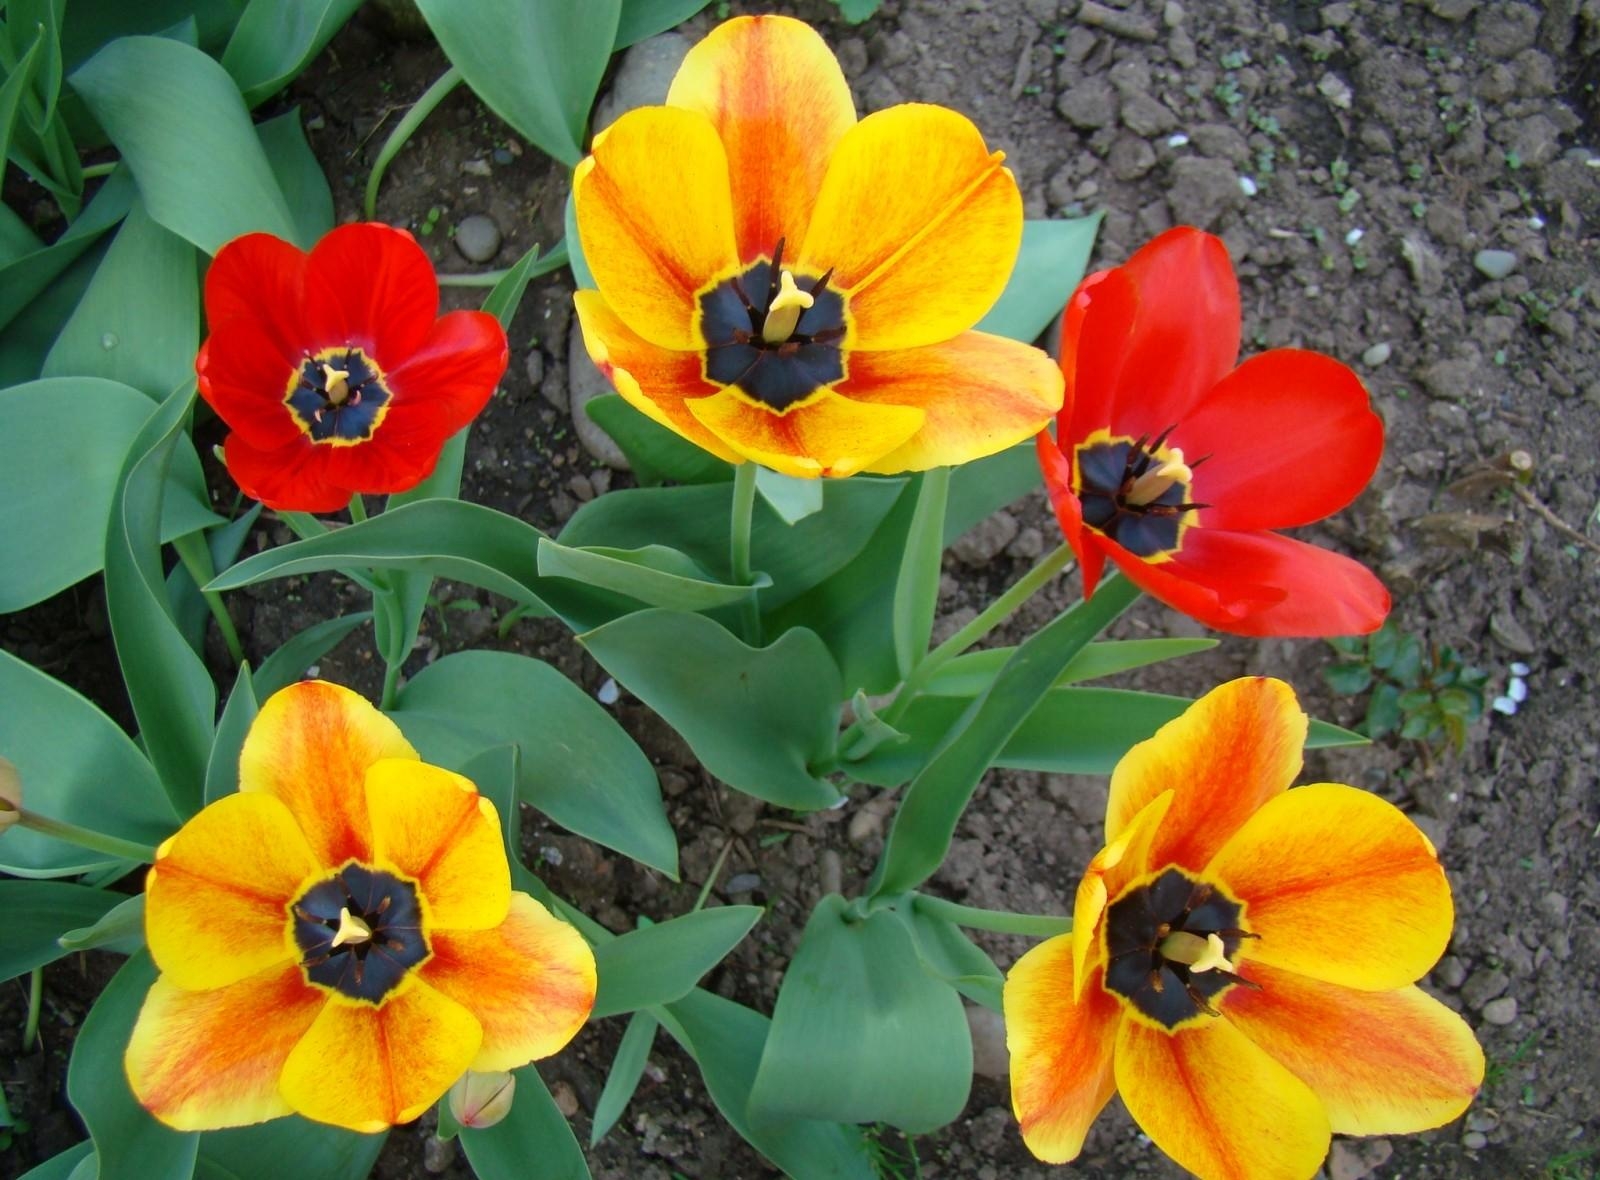 Cool Backgrounds flowerbed, loose, tulips, earth Greens